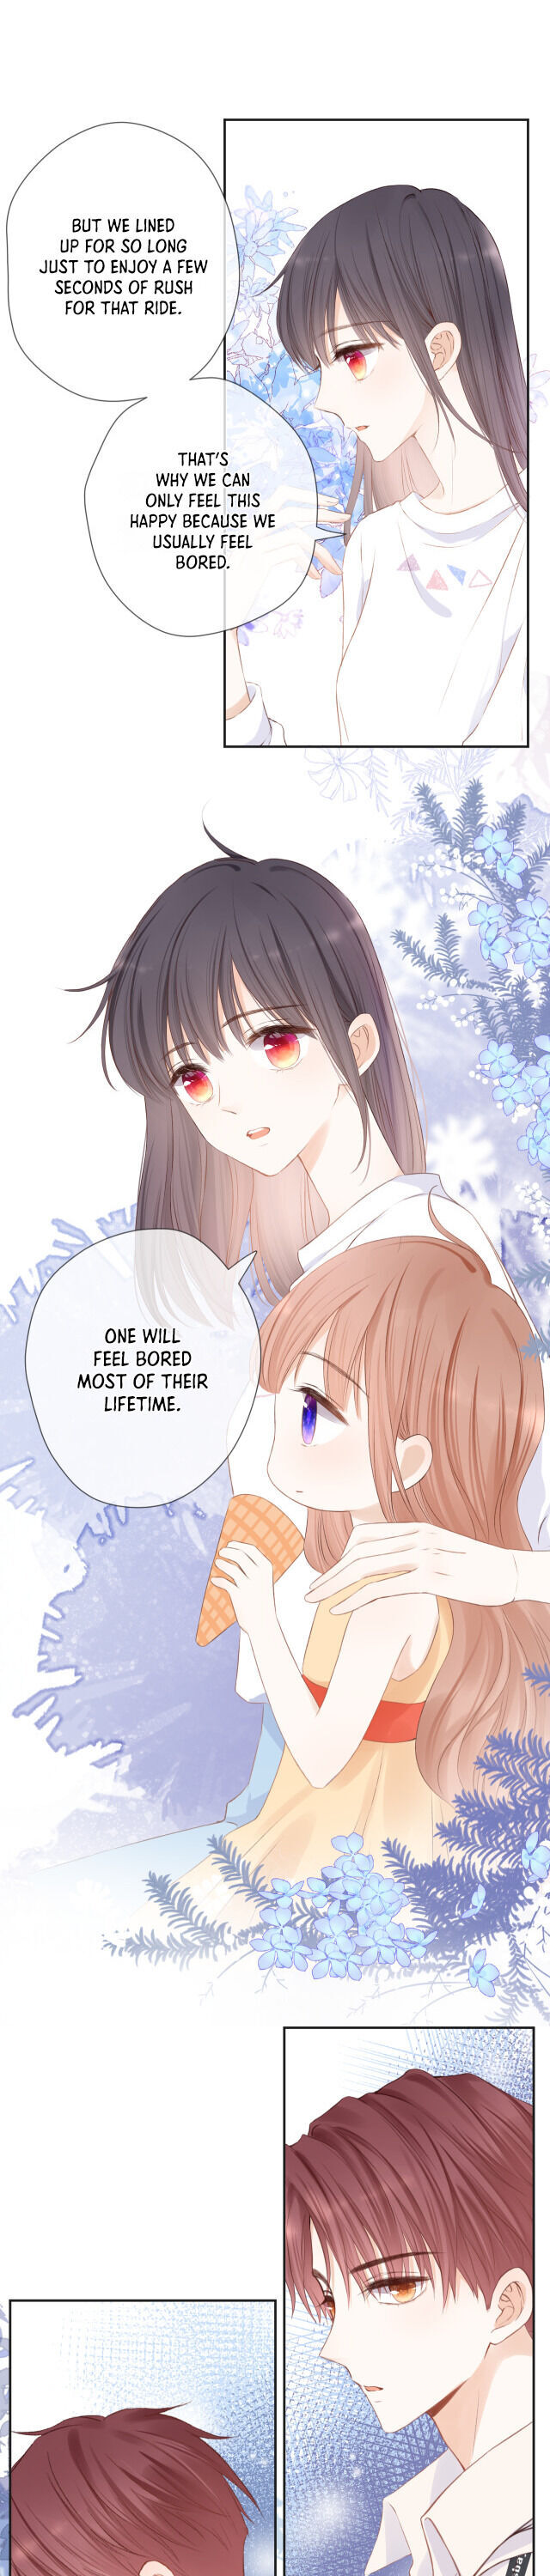 Unrequited Love Chapter 8 - Page 4